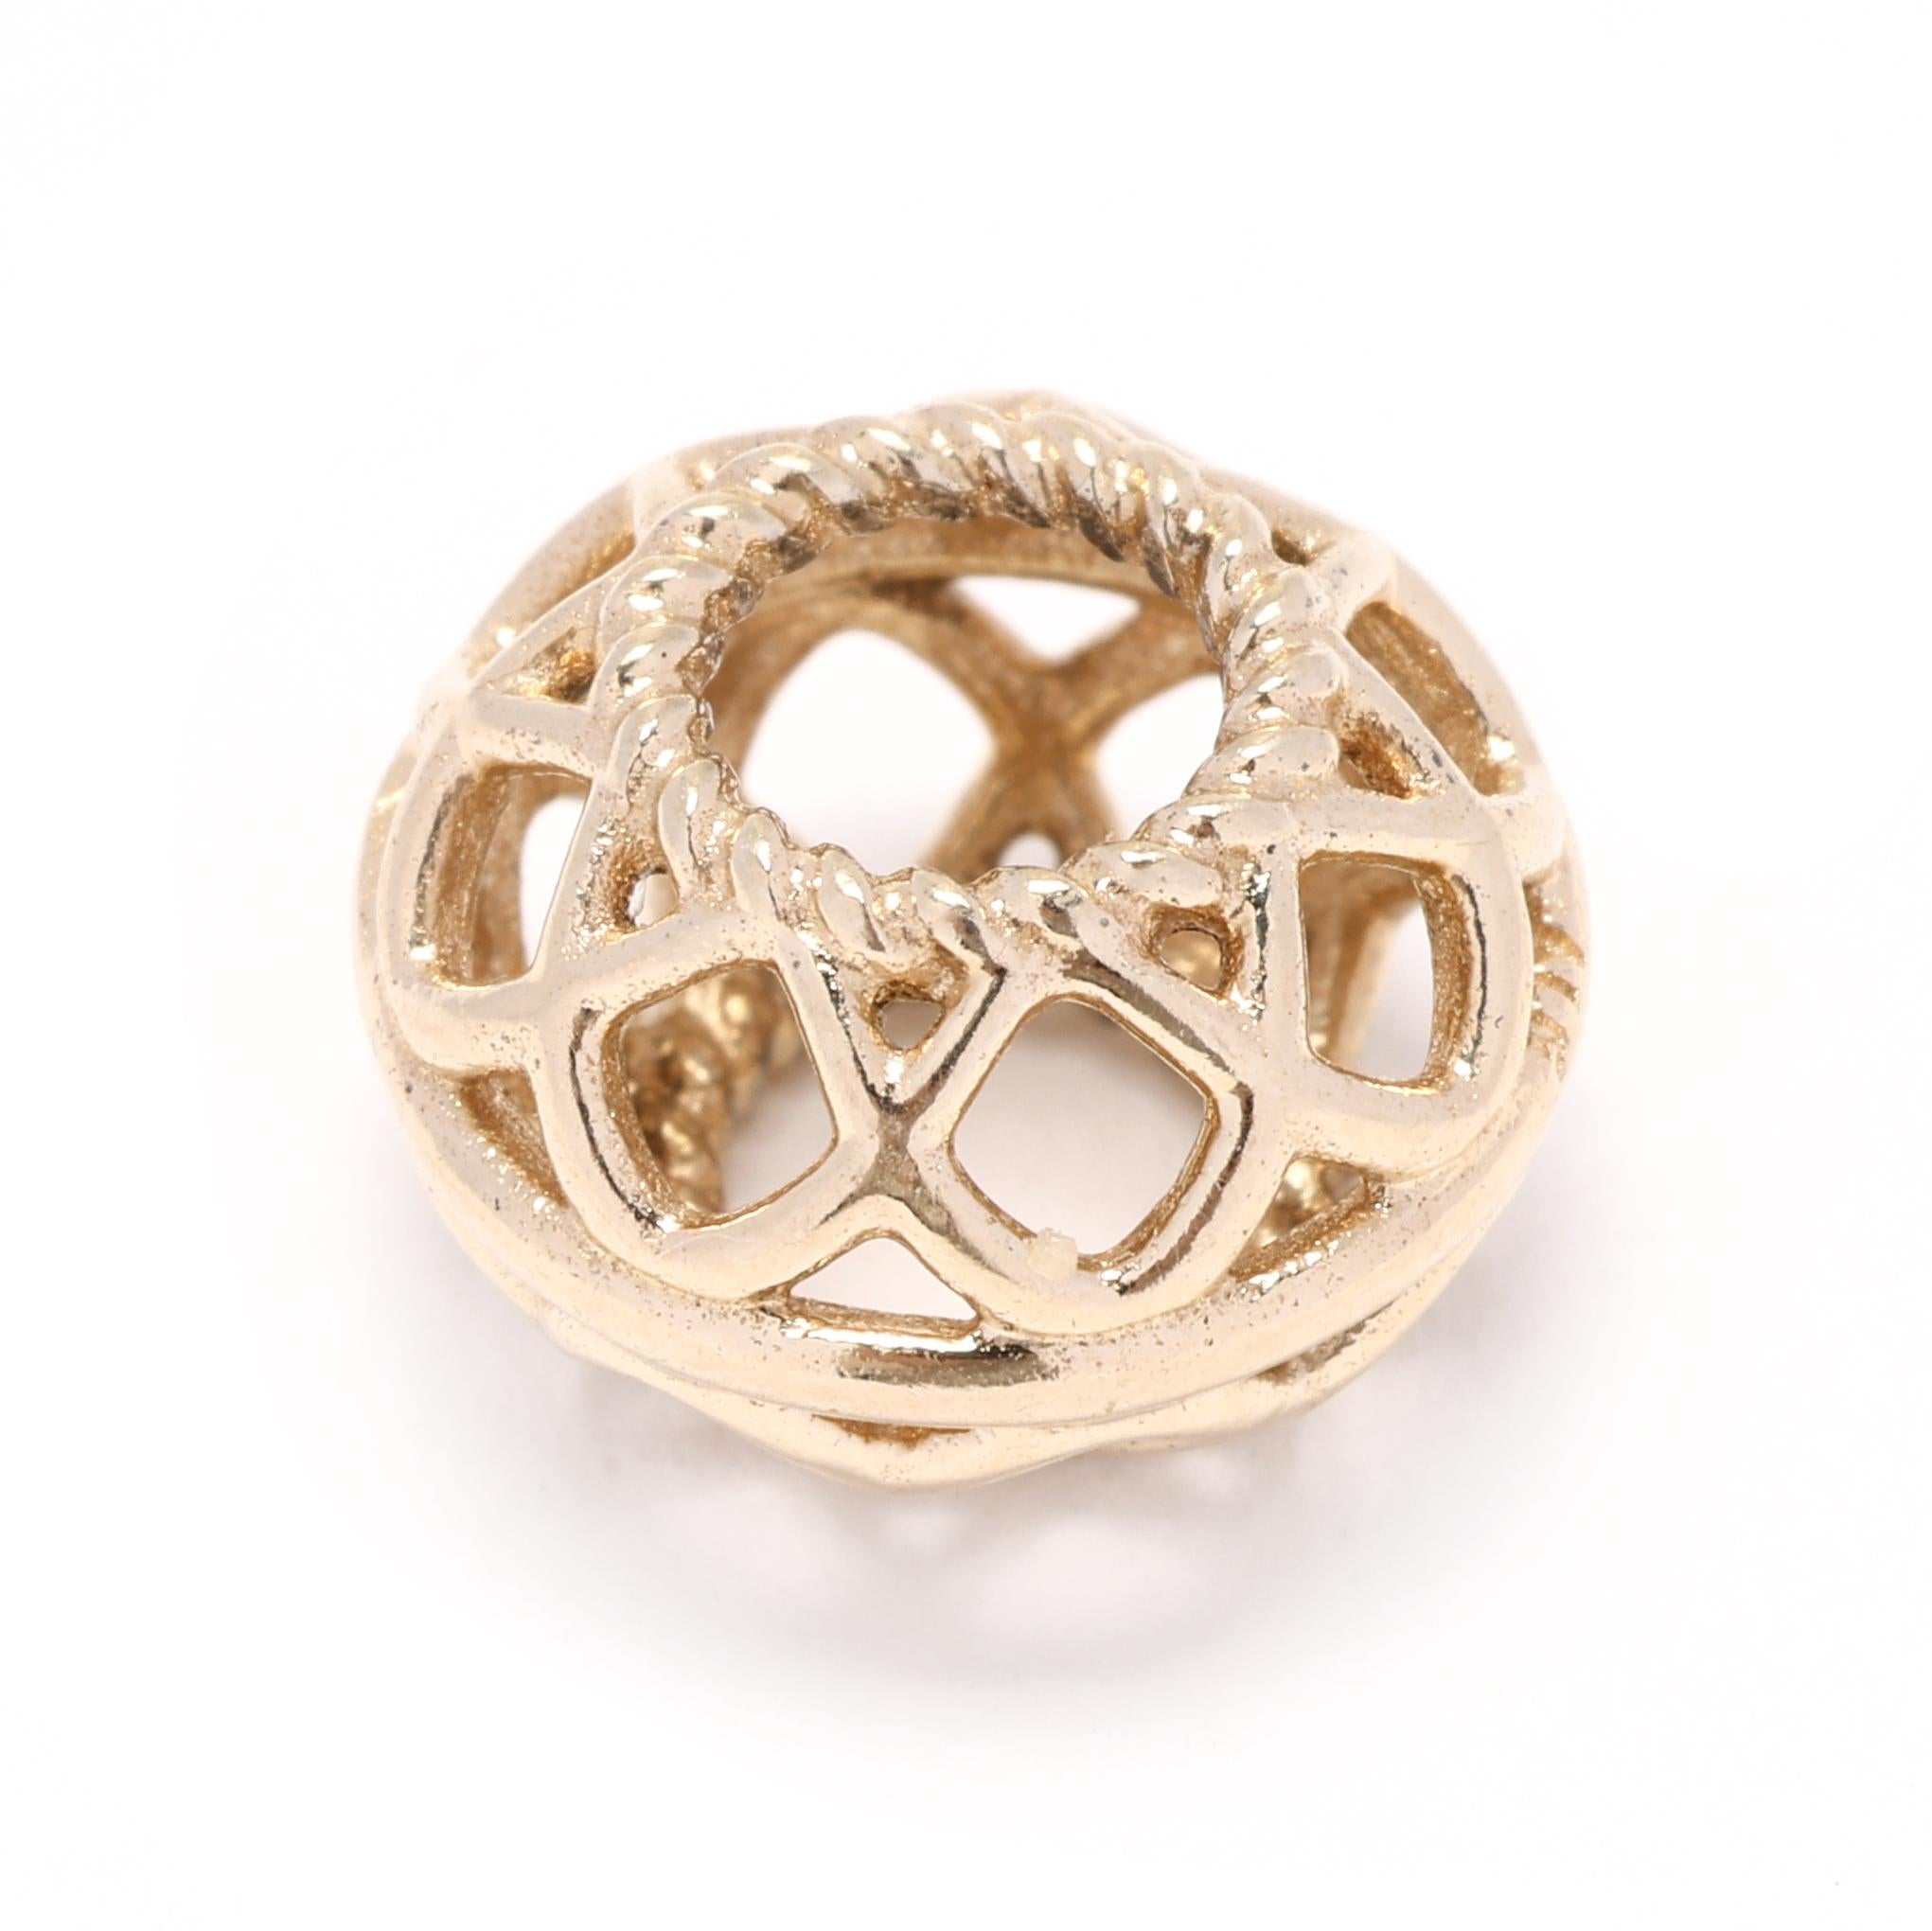 Add a touch of elegance to your Pandora bracelet with this stunning Pandora Open Lattice Charm. Made from 14k yellow gold, this authentic Pandora charm features a beautiful openwork lattice design. The open lattice design of this charm adds a